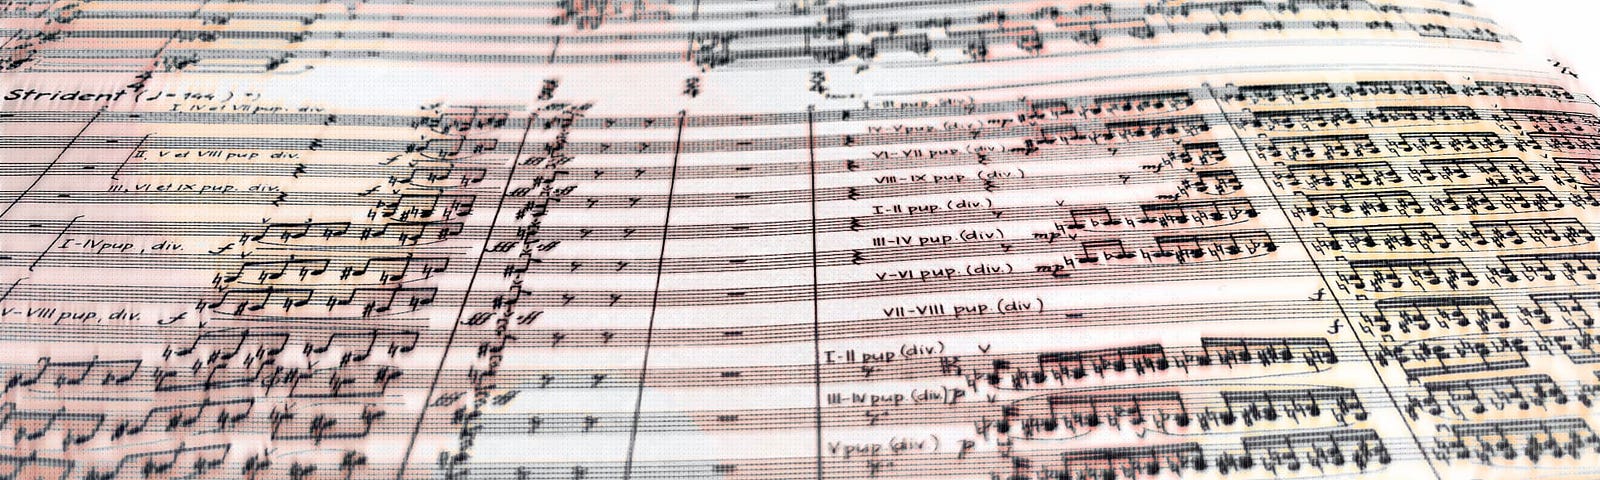 Close-up photo of an orchestral score